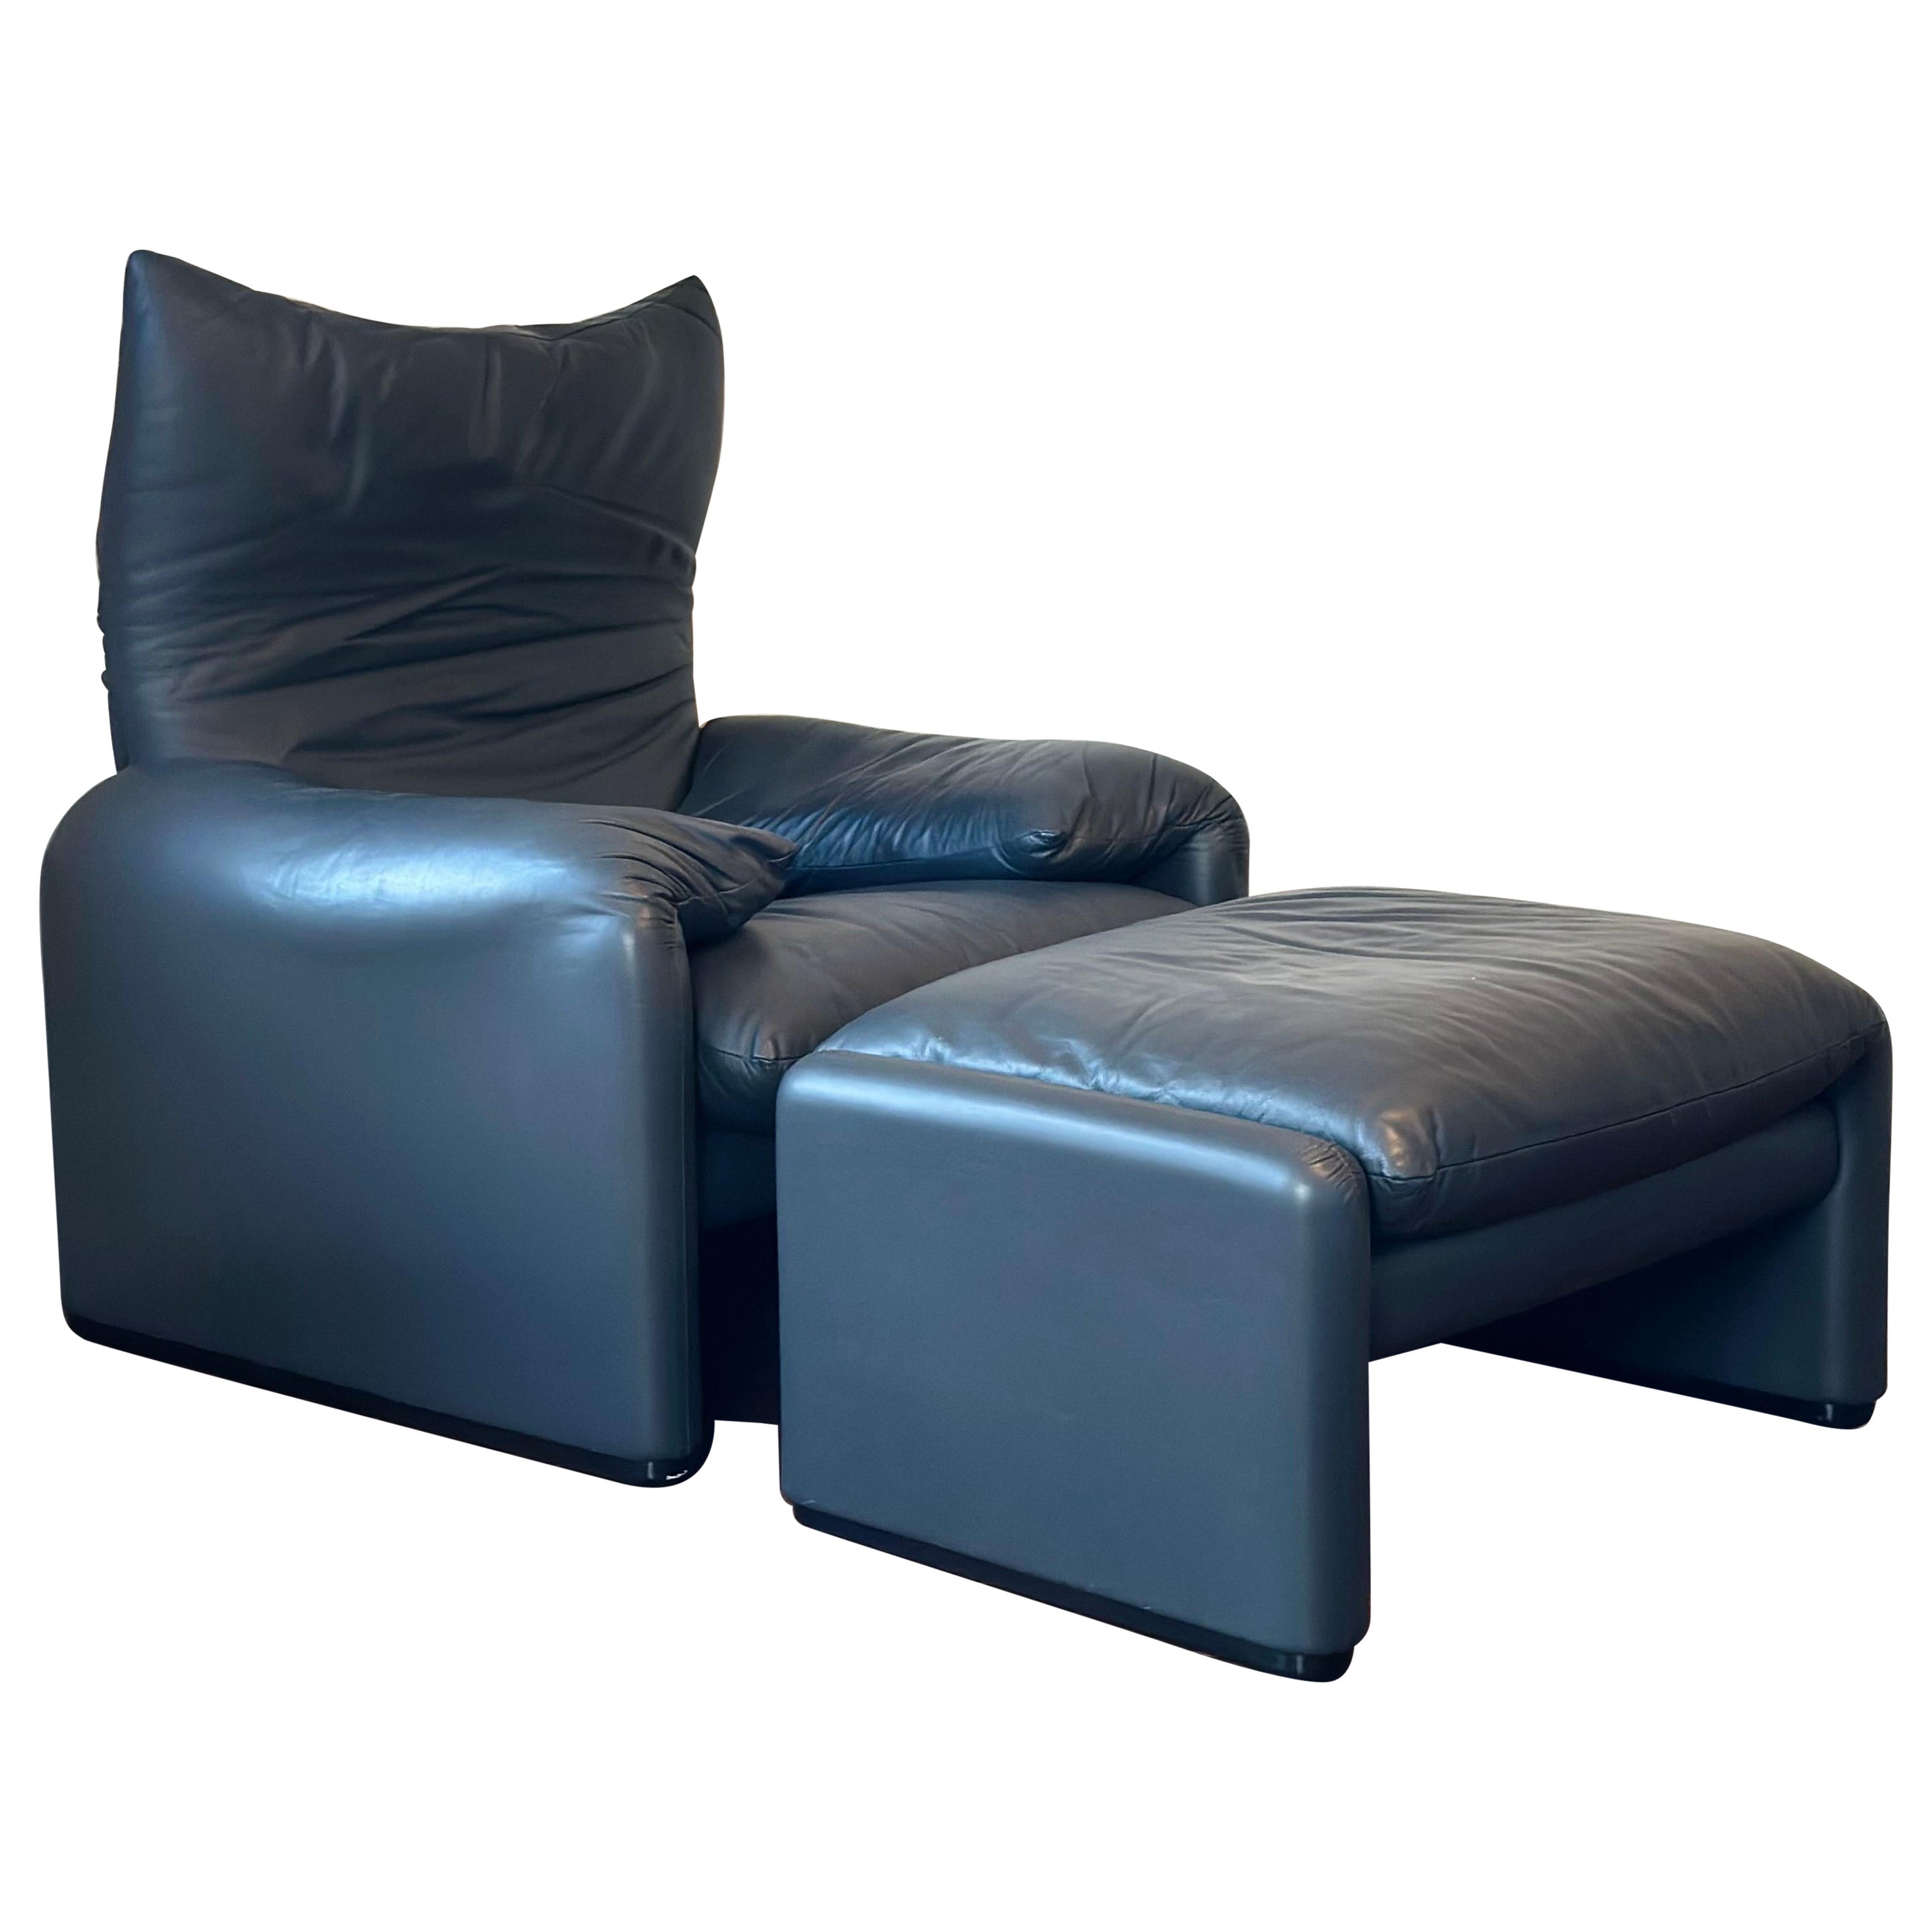 2010 Cassina Vico Magistretti Maralunga Black Leather Chair and Ottoman - a Pair For Sale